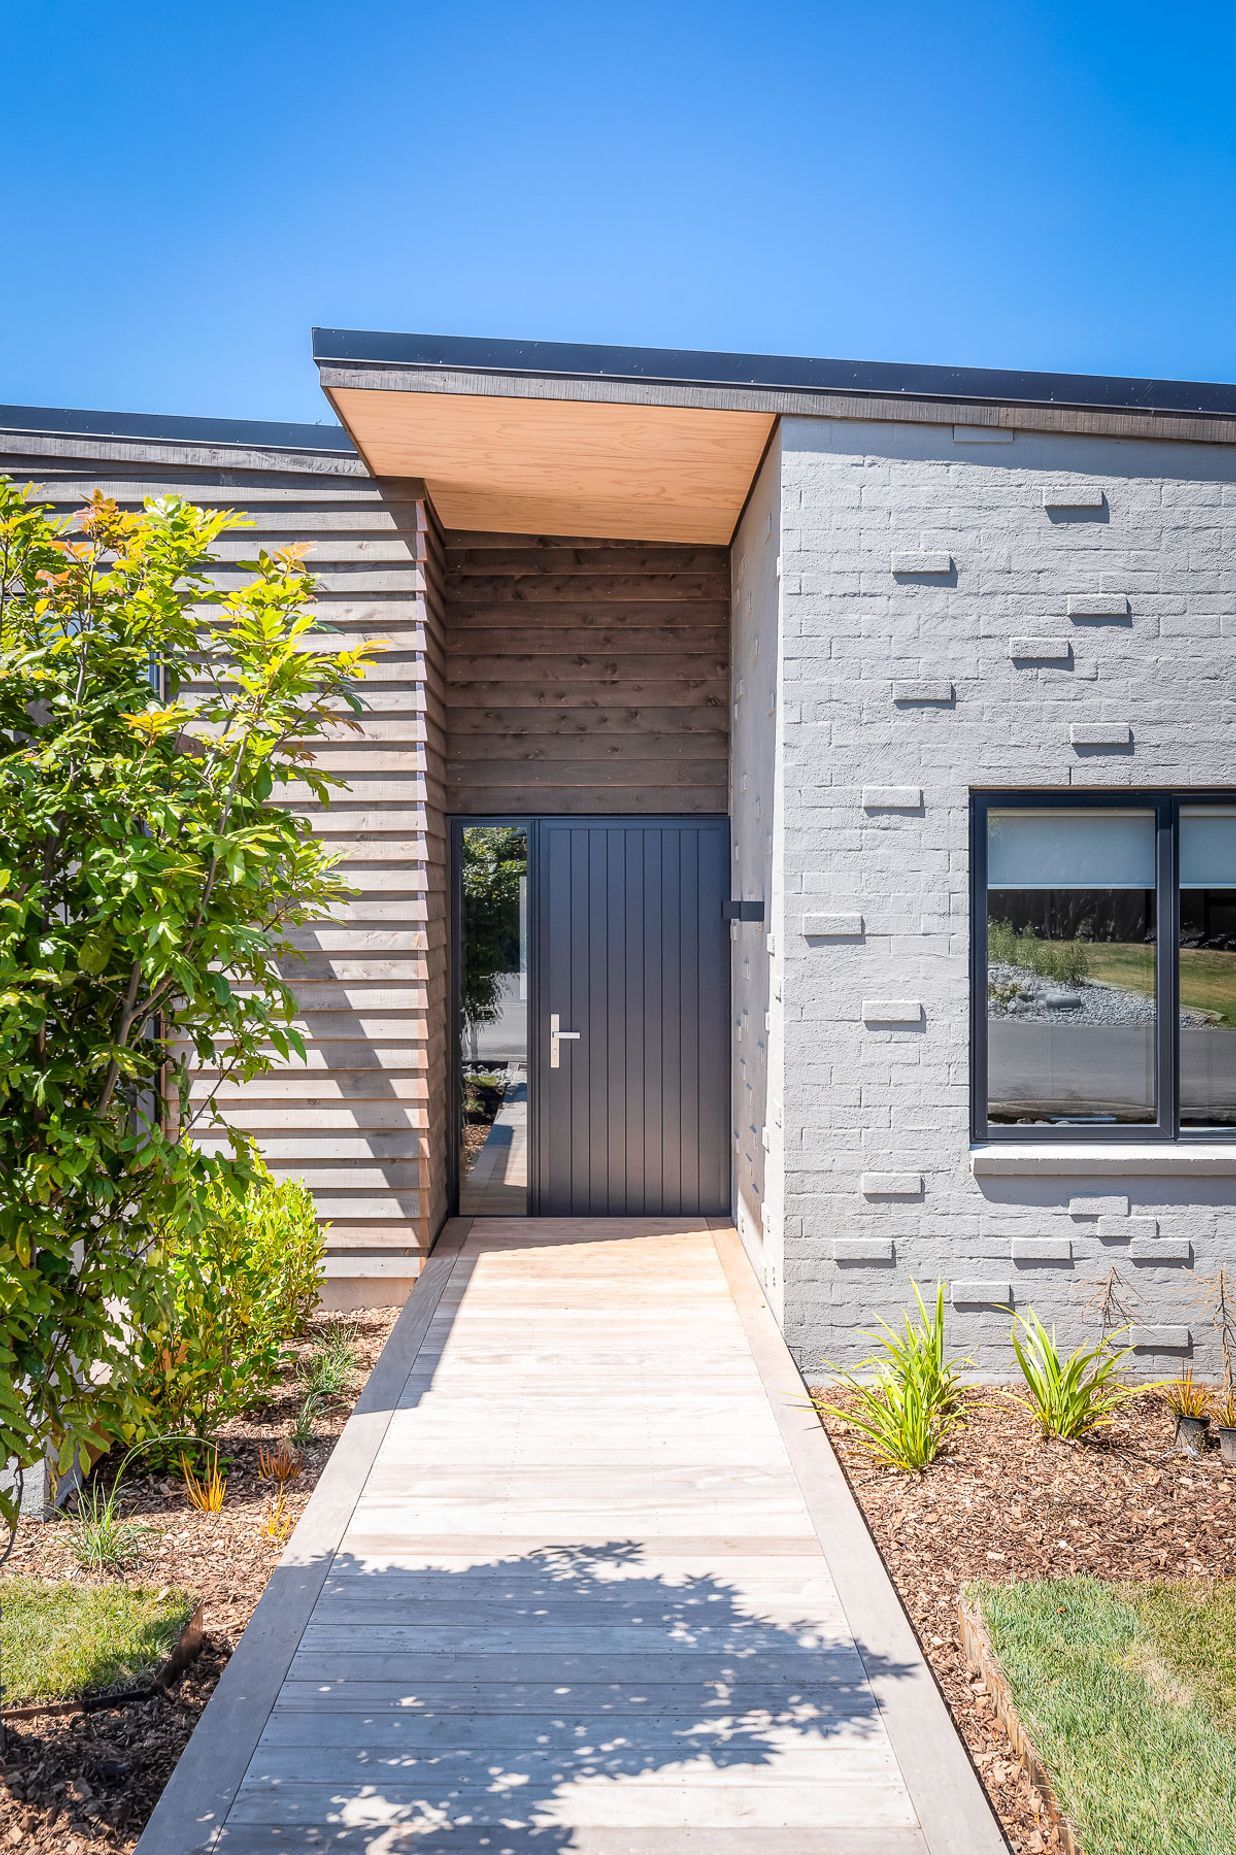 Stepped-back within the building's envelope, the recessed nature of the front door hints at a home that has been designed to offer a comforting welcome after a long day.